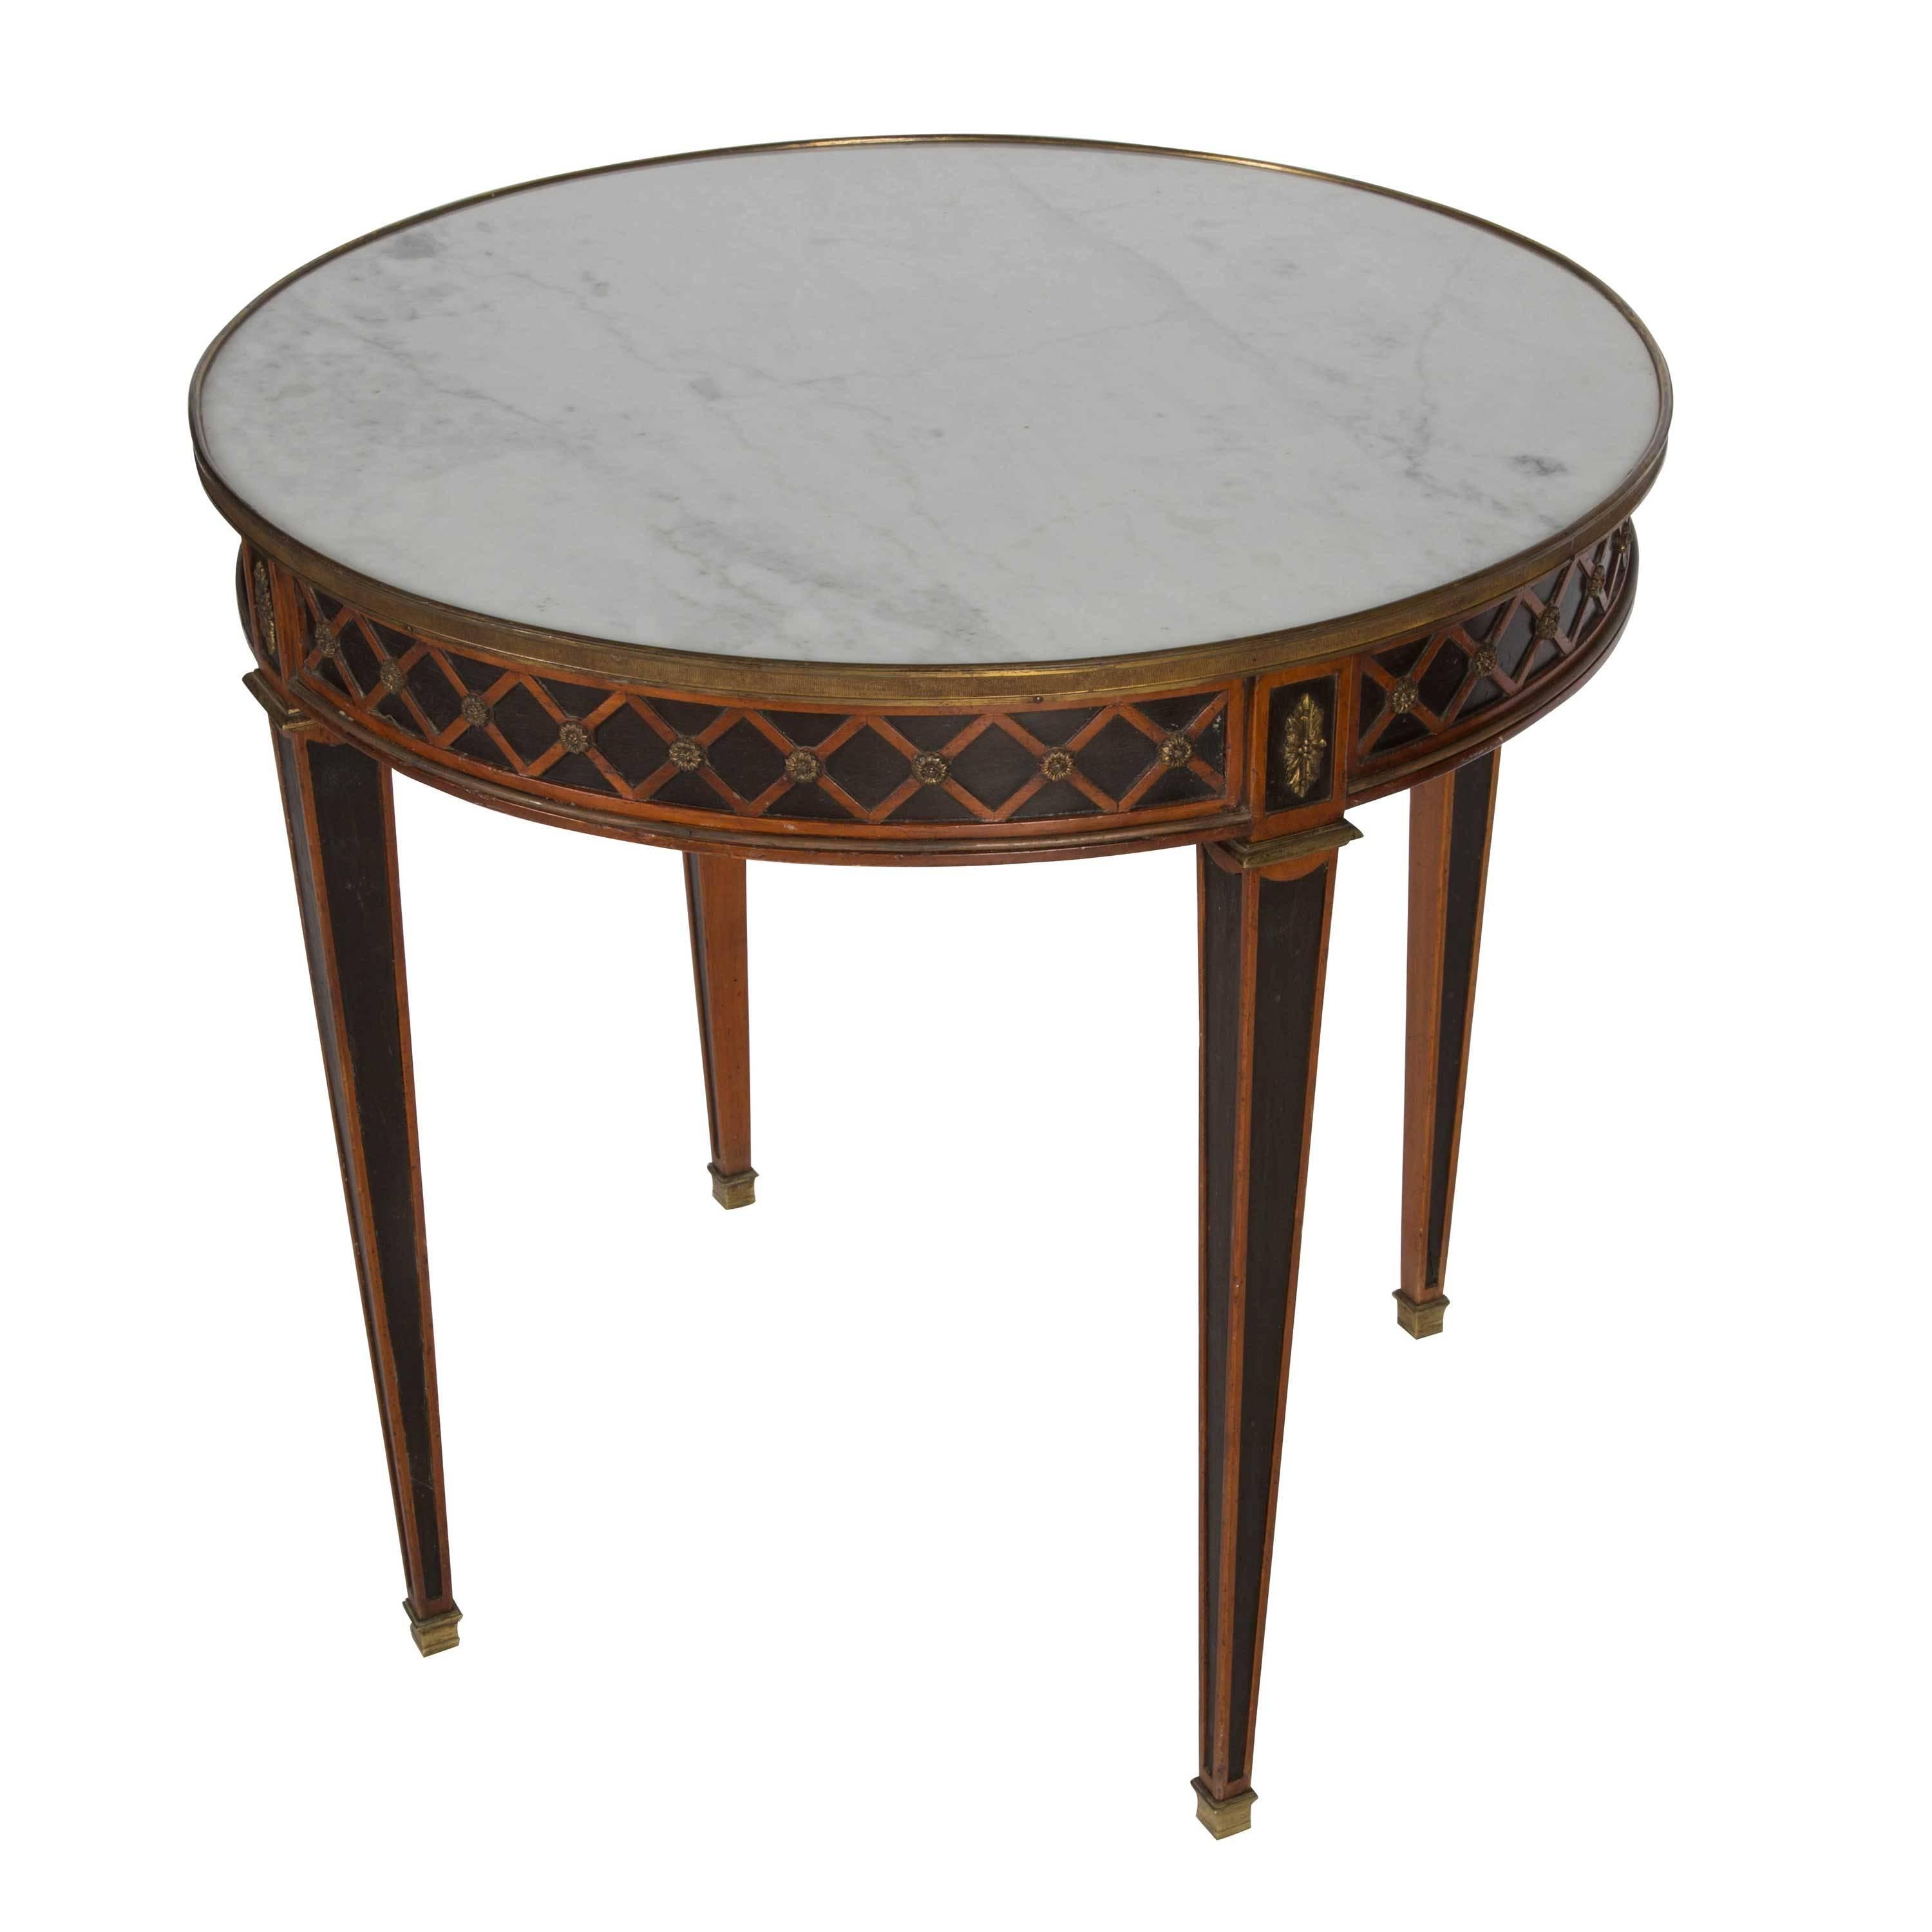 1950s French bouillotte table in the manner of Maison Jansen.